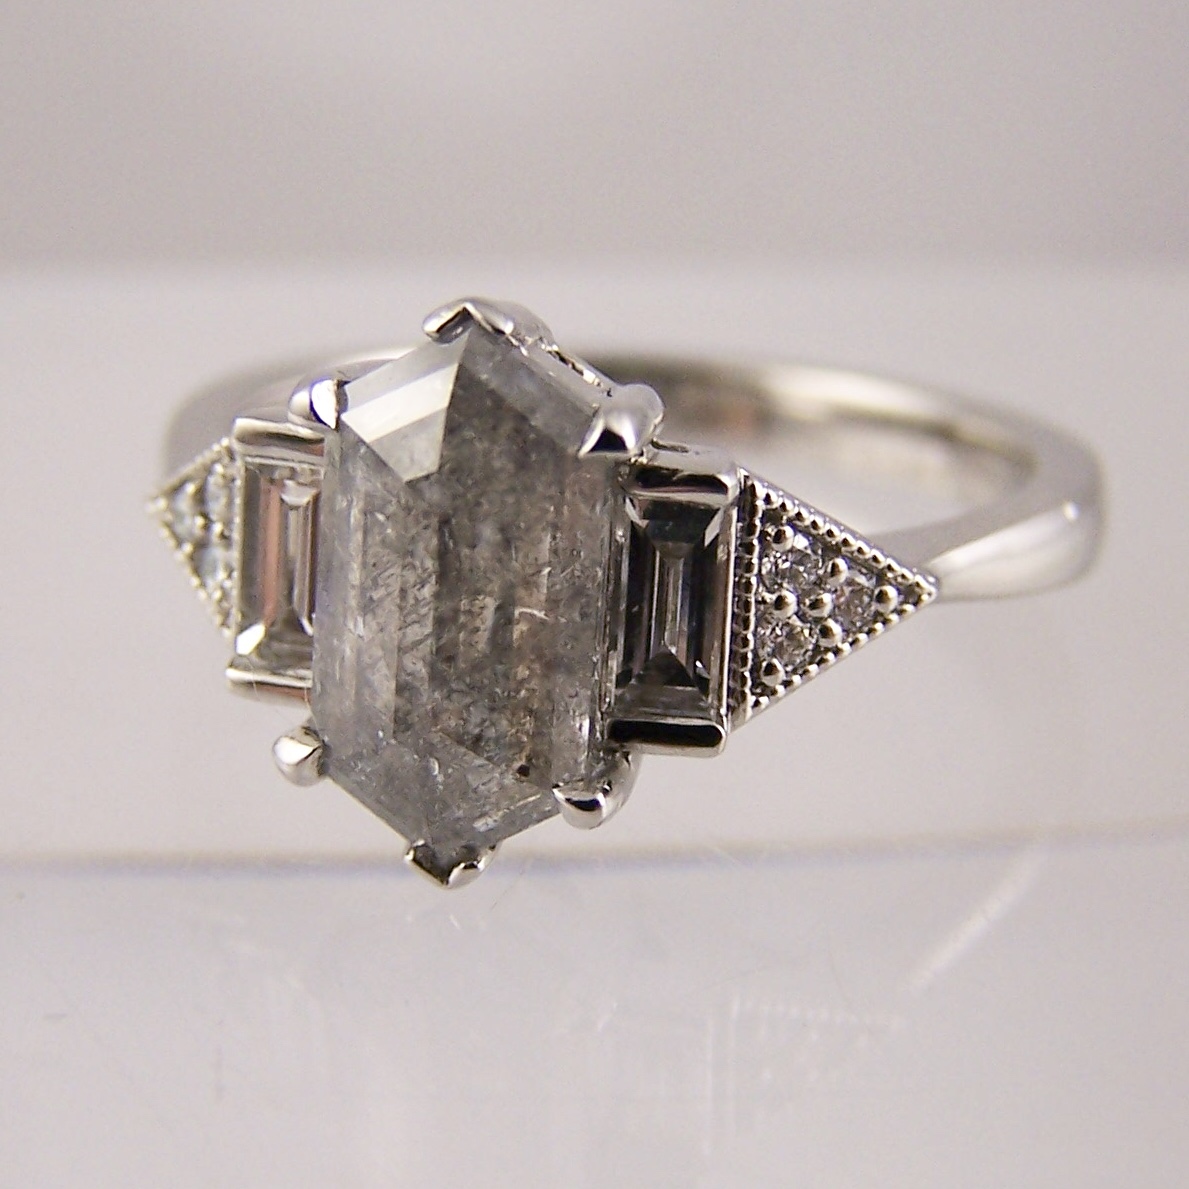 Clear Diamond Engagement Ring, Point No Point Studio